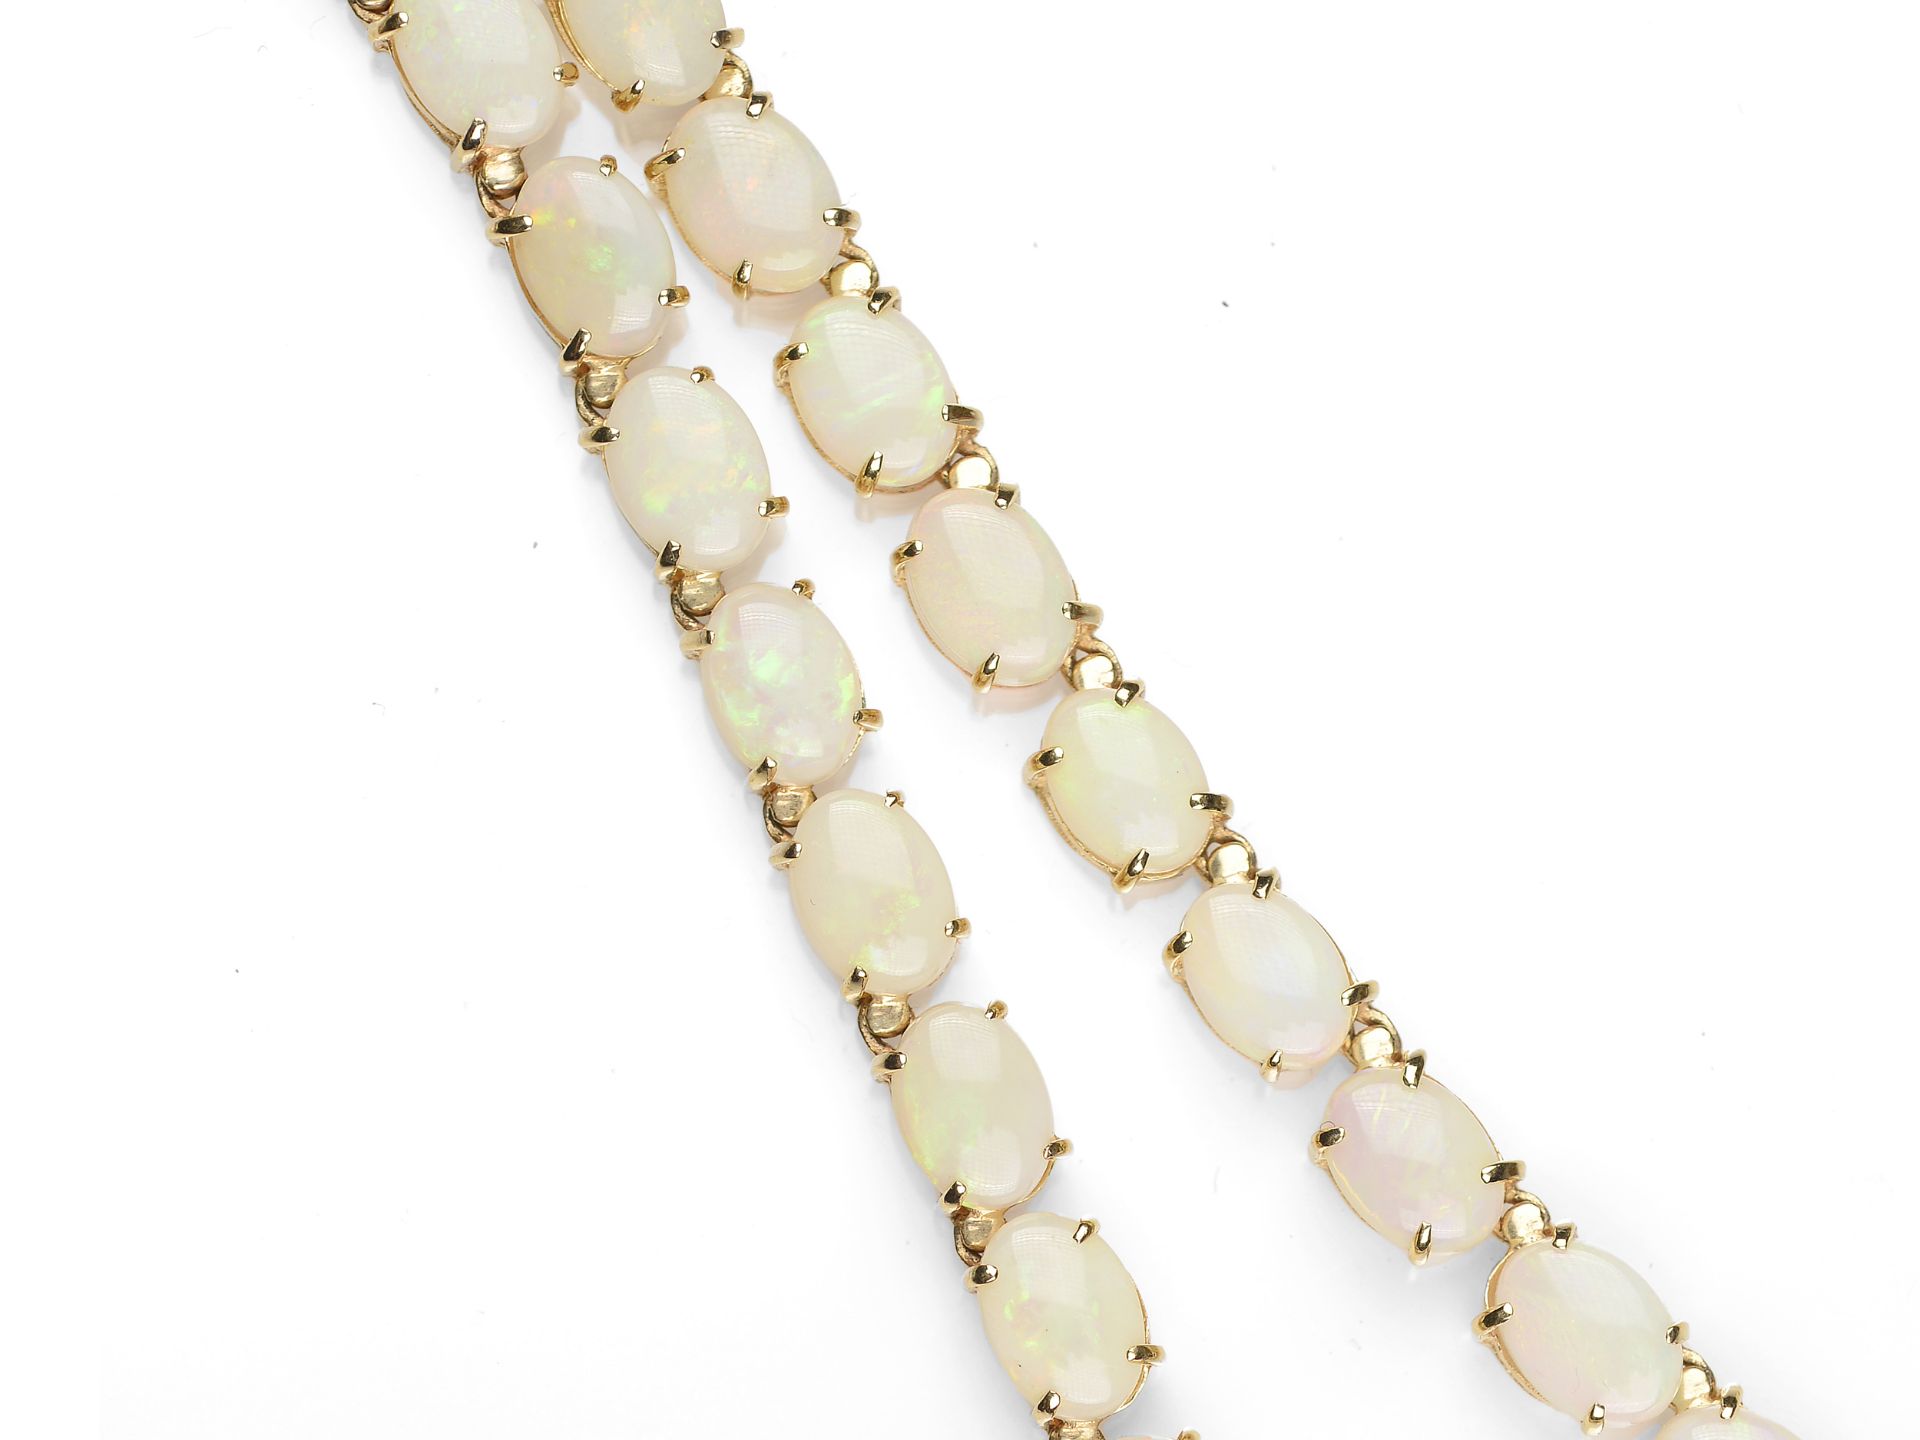 Necklace with opals - Image 2 of 3